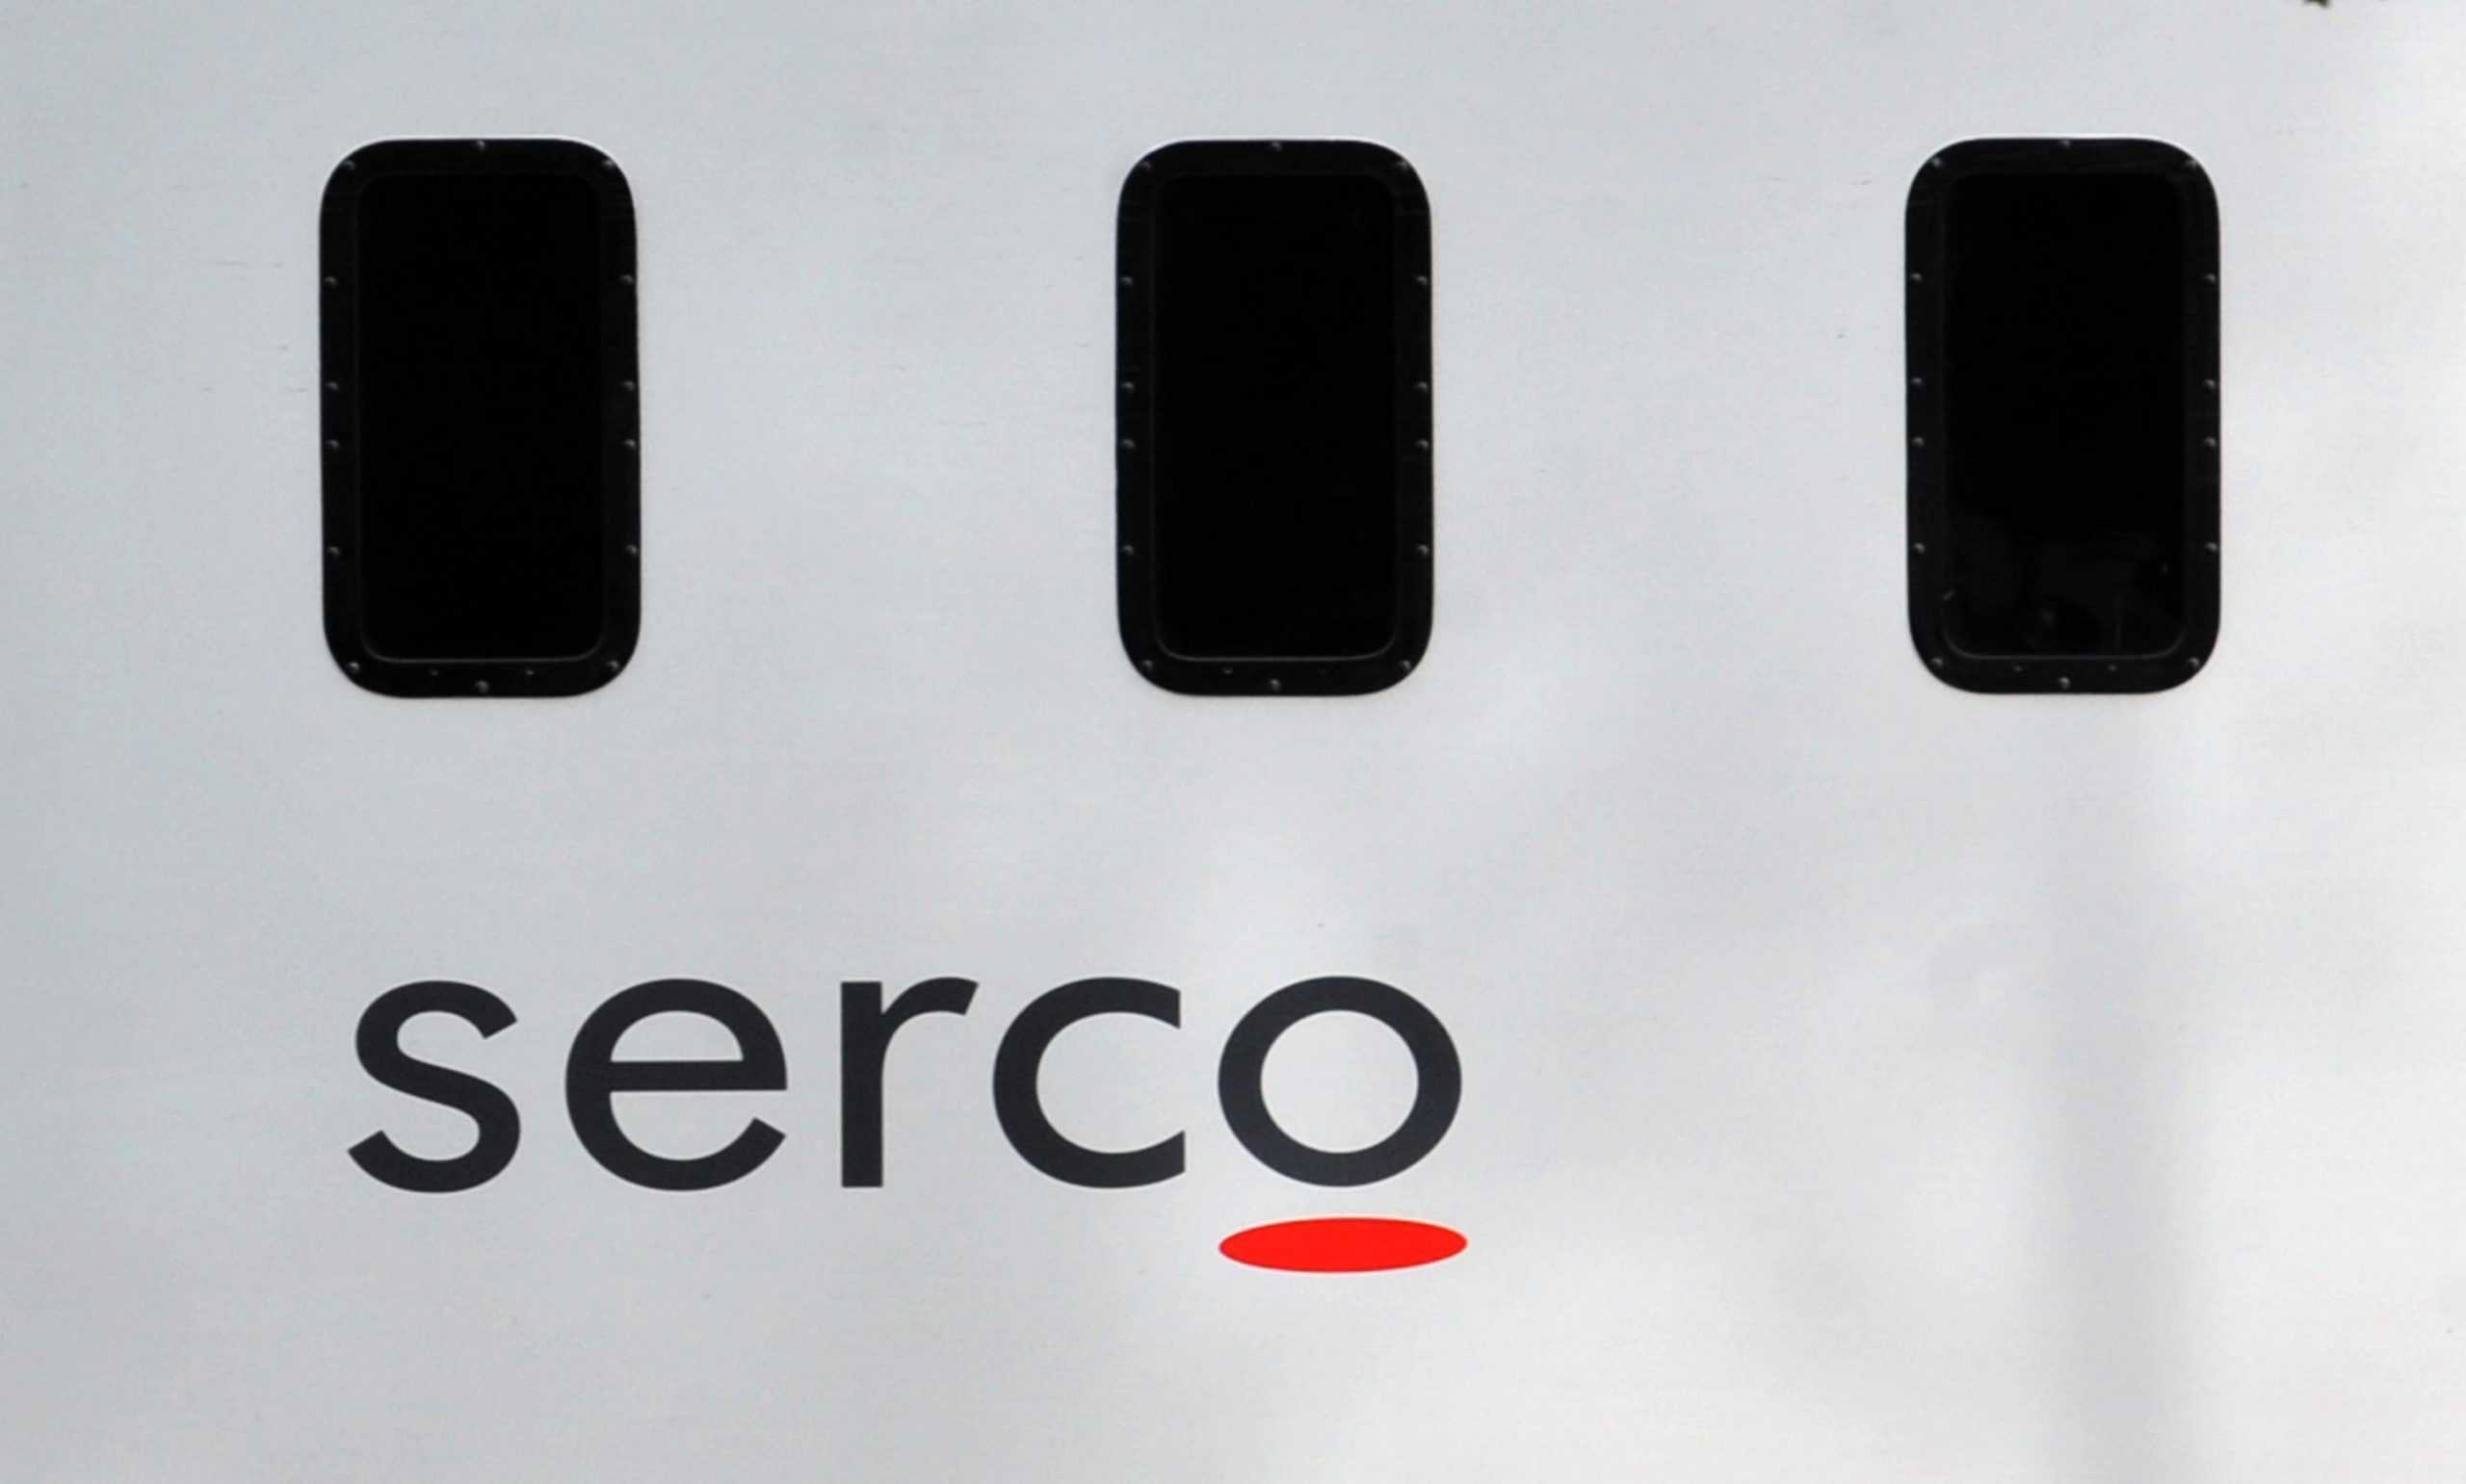 Investors set to approve Serco chief’s £4.9 million pay packet